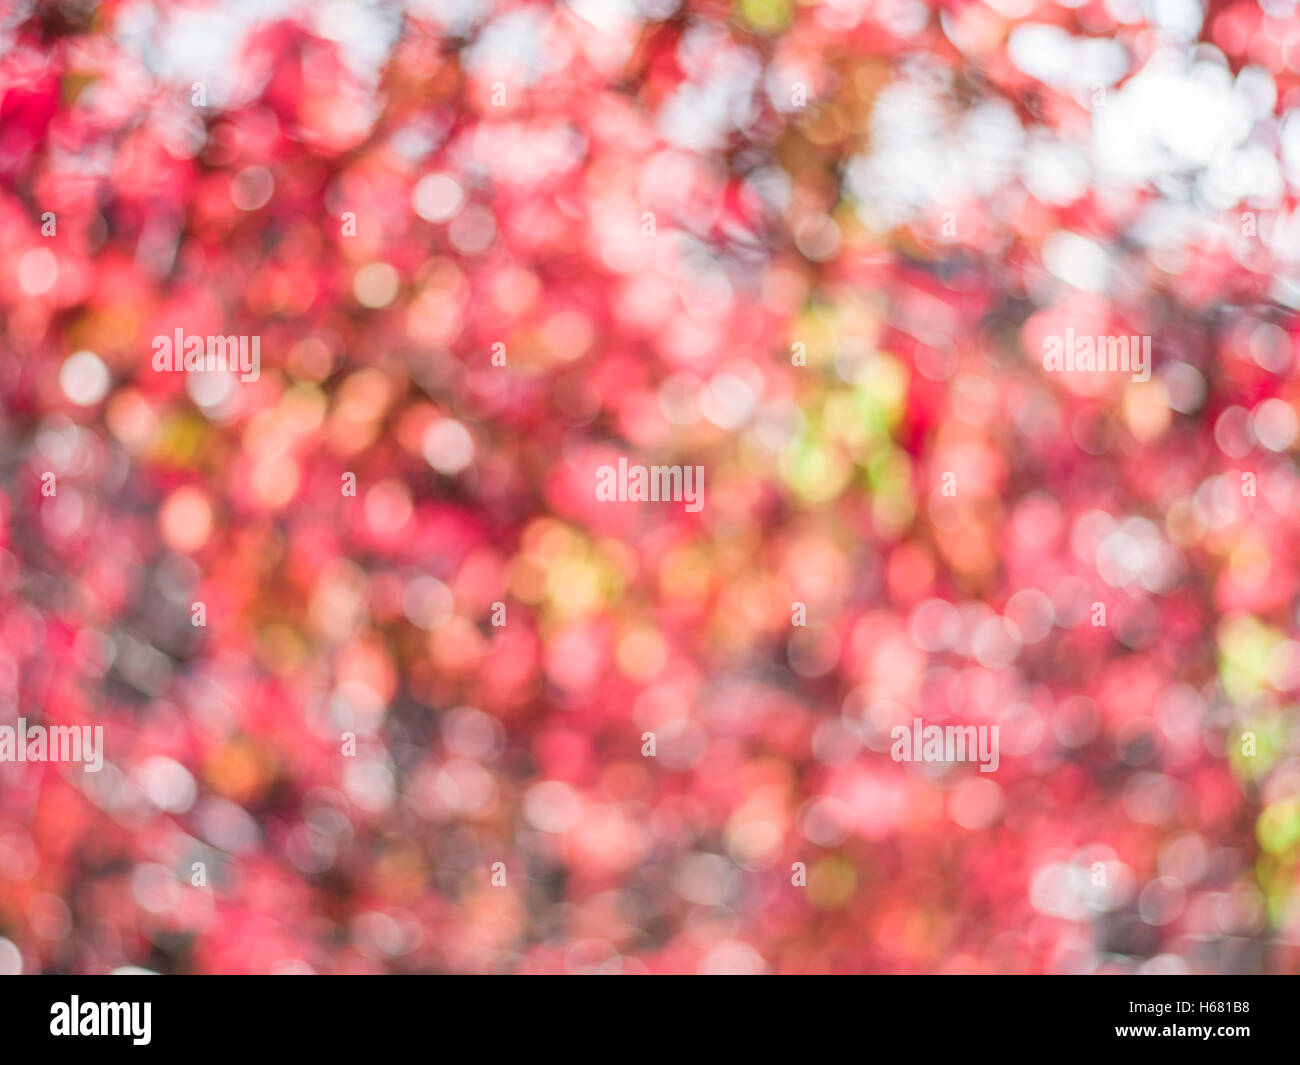 Blurred red leaves. Nature background. Stock Photo